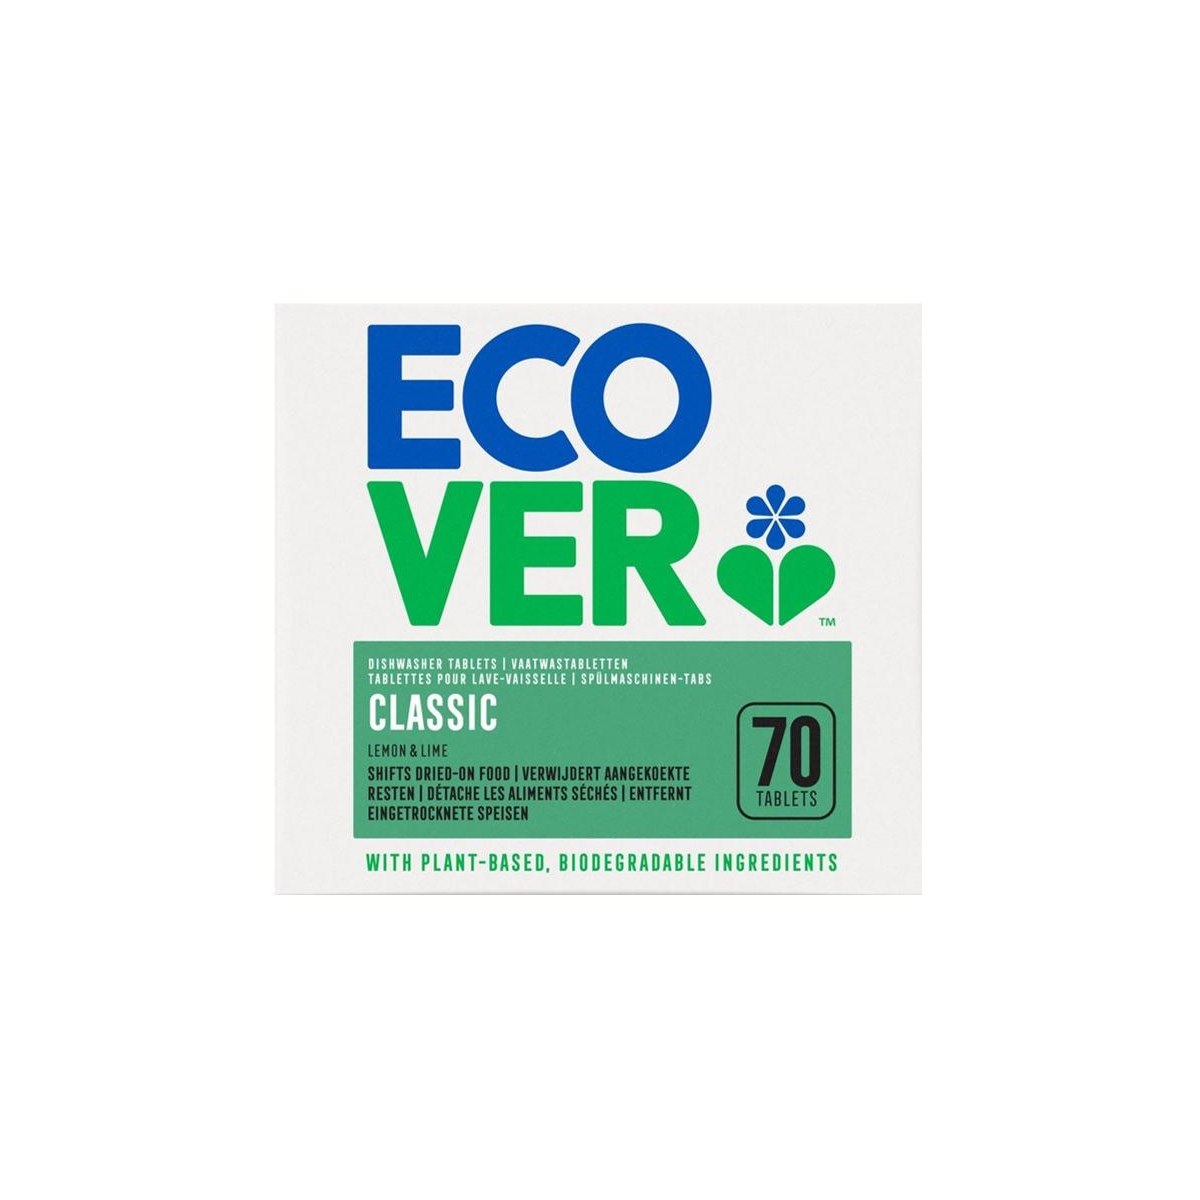 Ecover Classic Dishwasher Tablets x 70